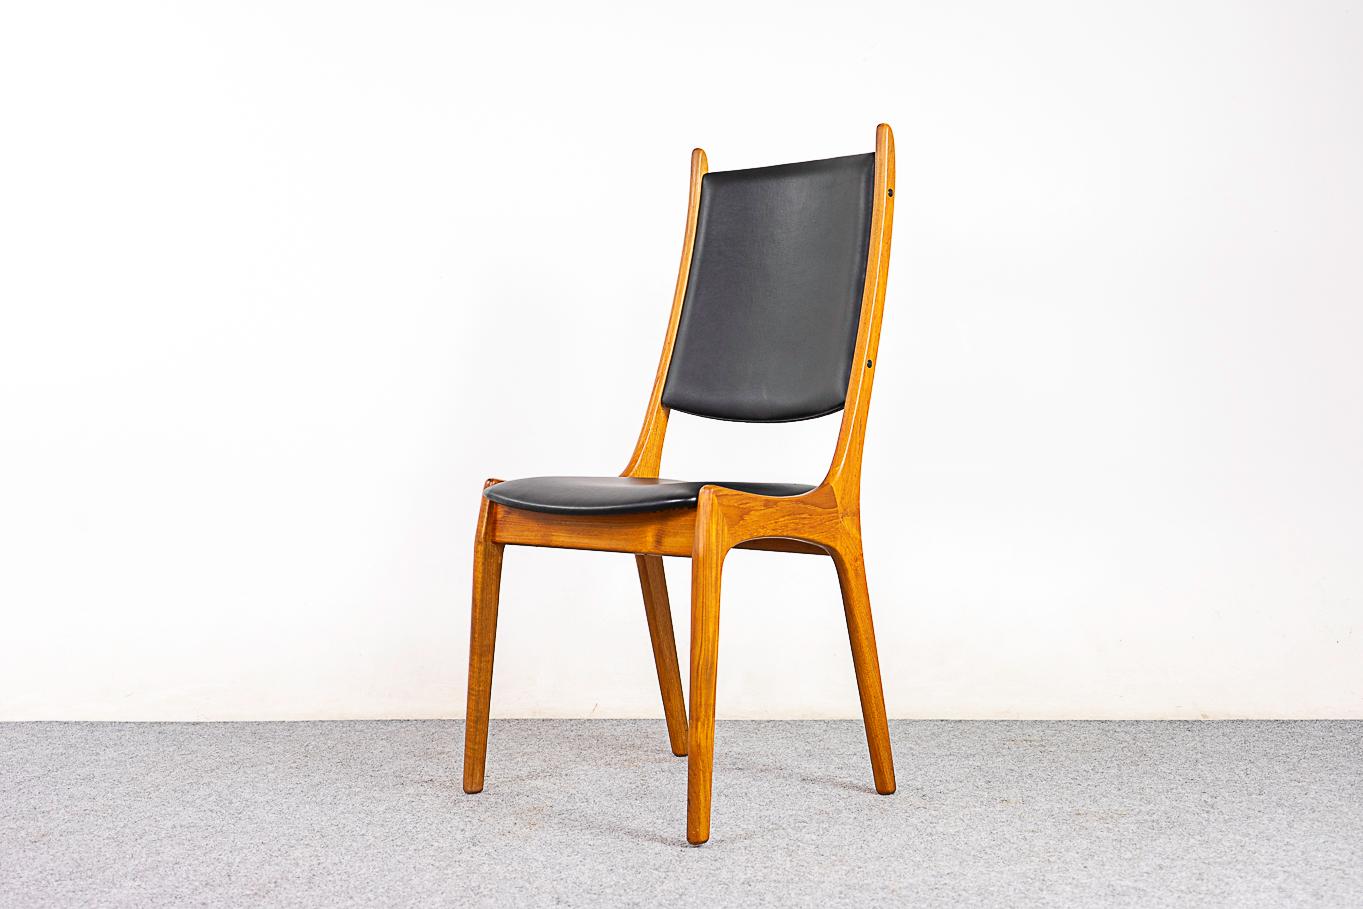 Teak mid-century dining chairs, circa 1960's. Robust solid wood construction. Curving backrests with great support and comfortable generous seat. Original black vinyl upholstery in great condition. 